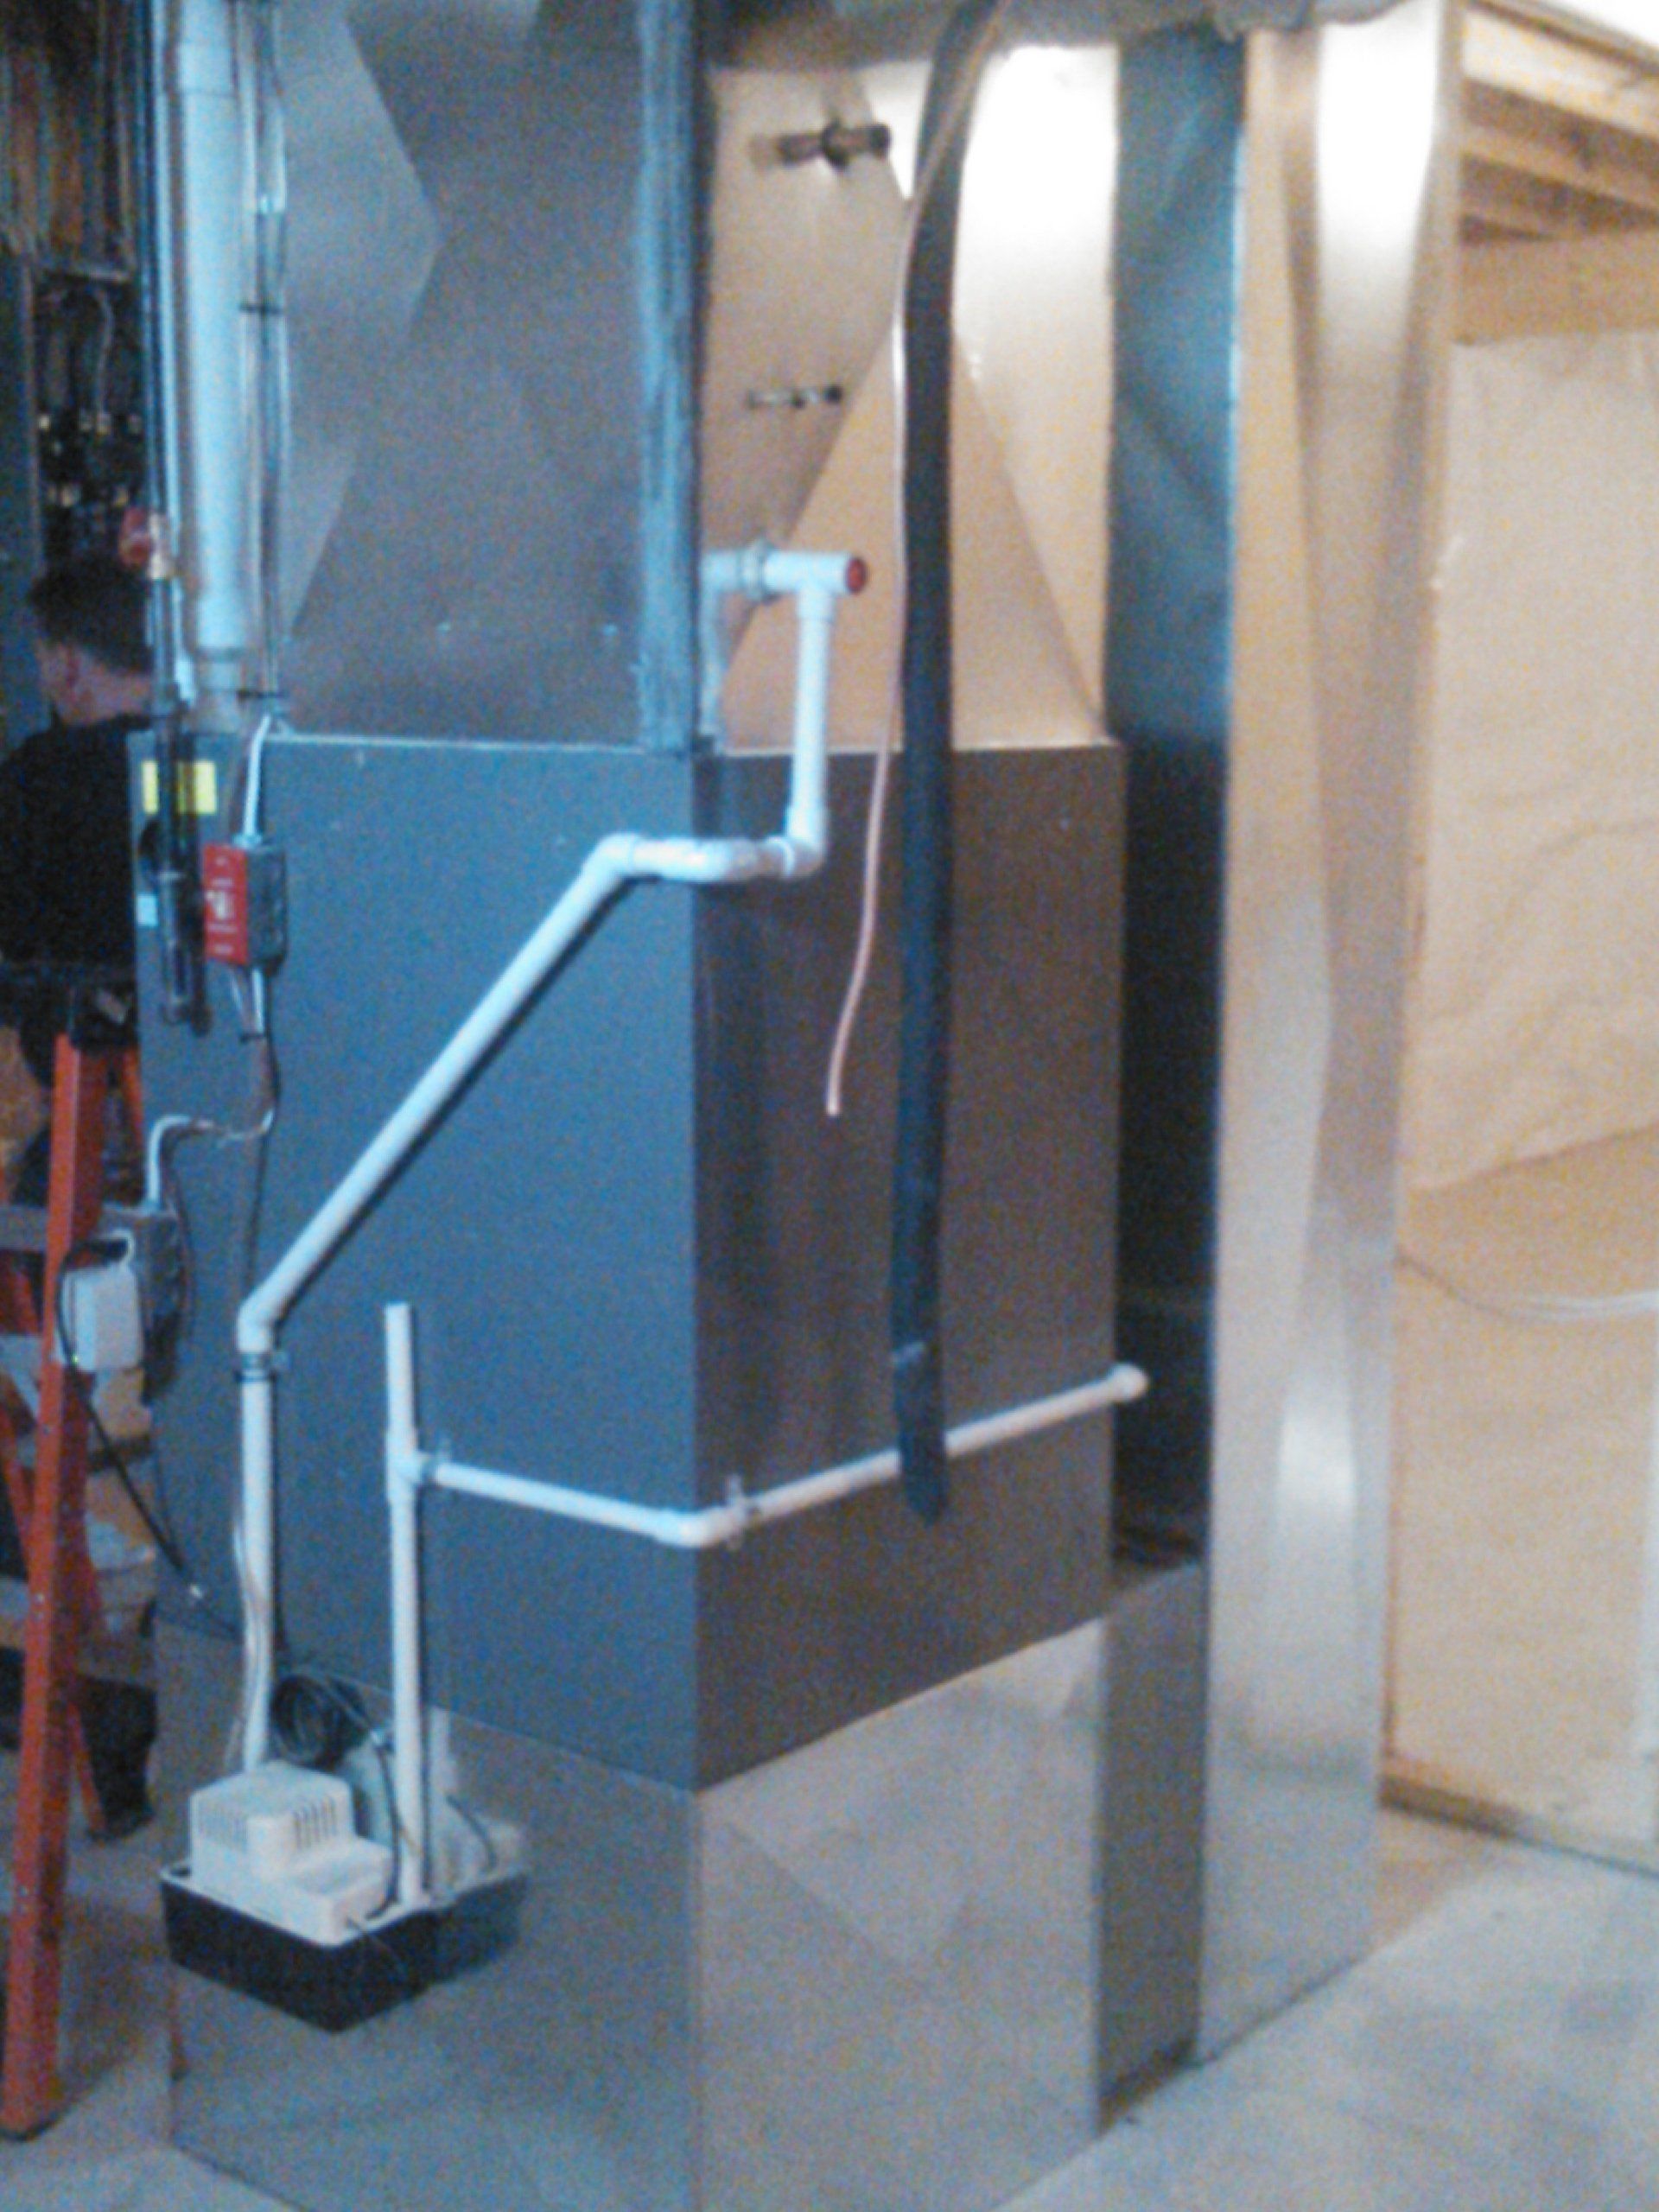 A repaired furnace by Adams Heating & Cooling in Saratoga Springs, NY